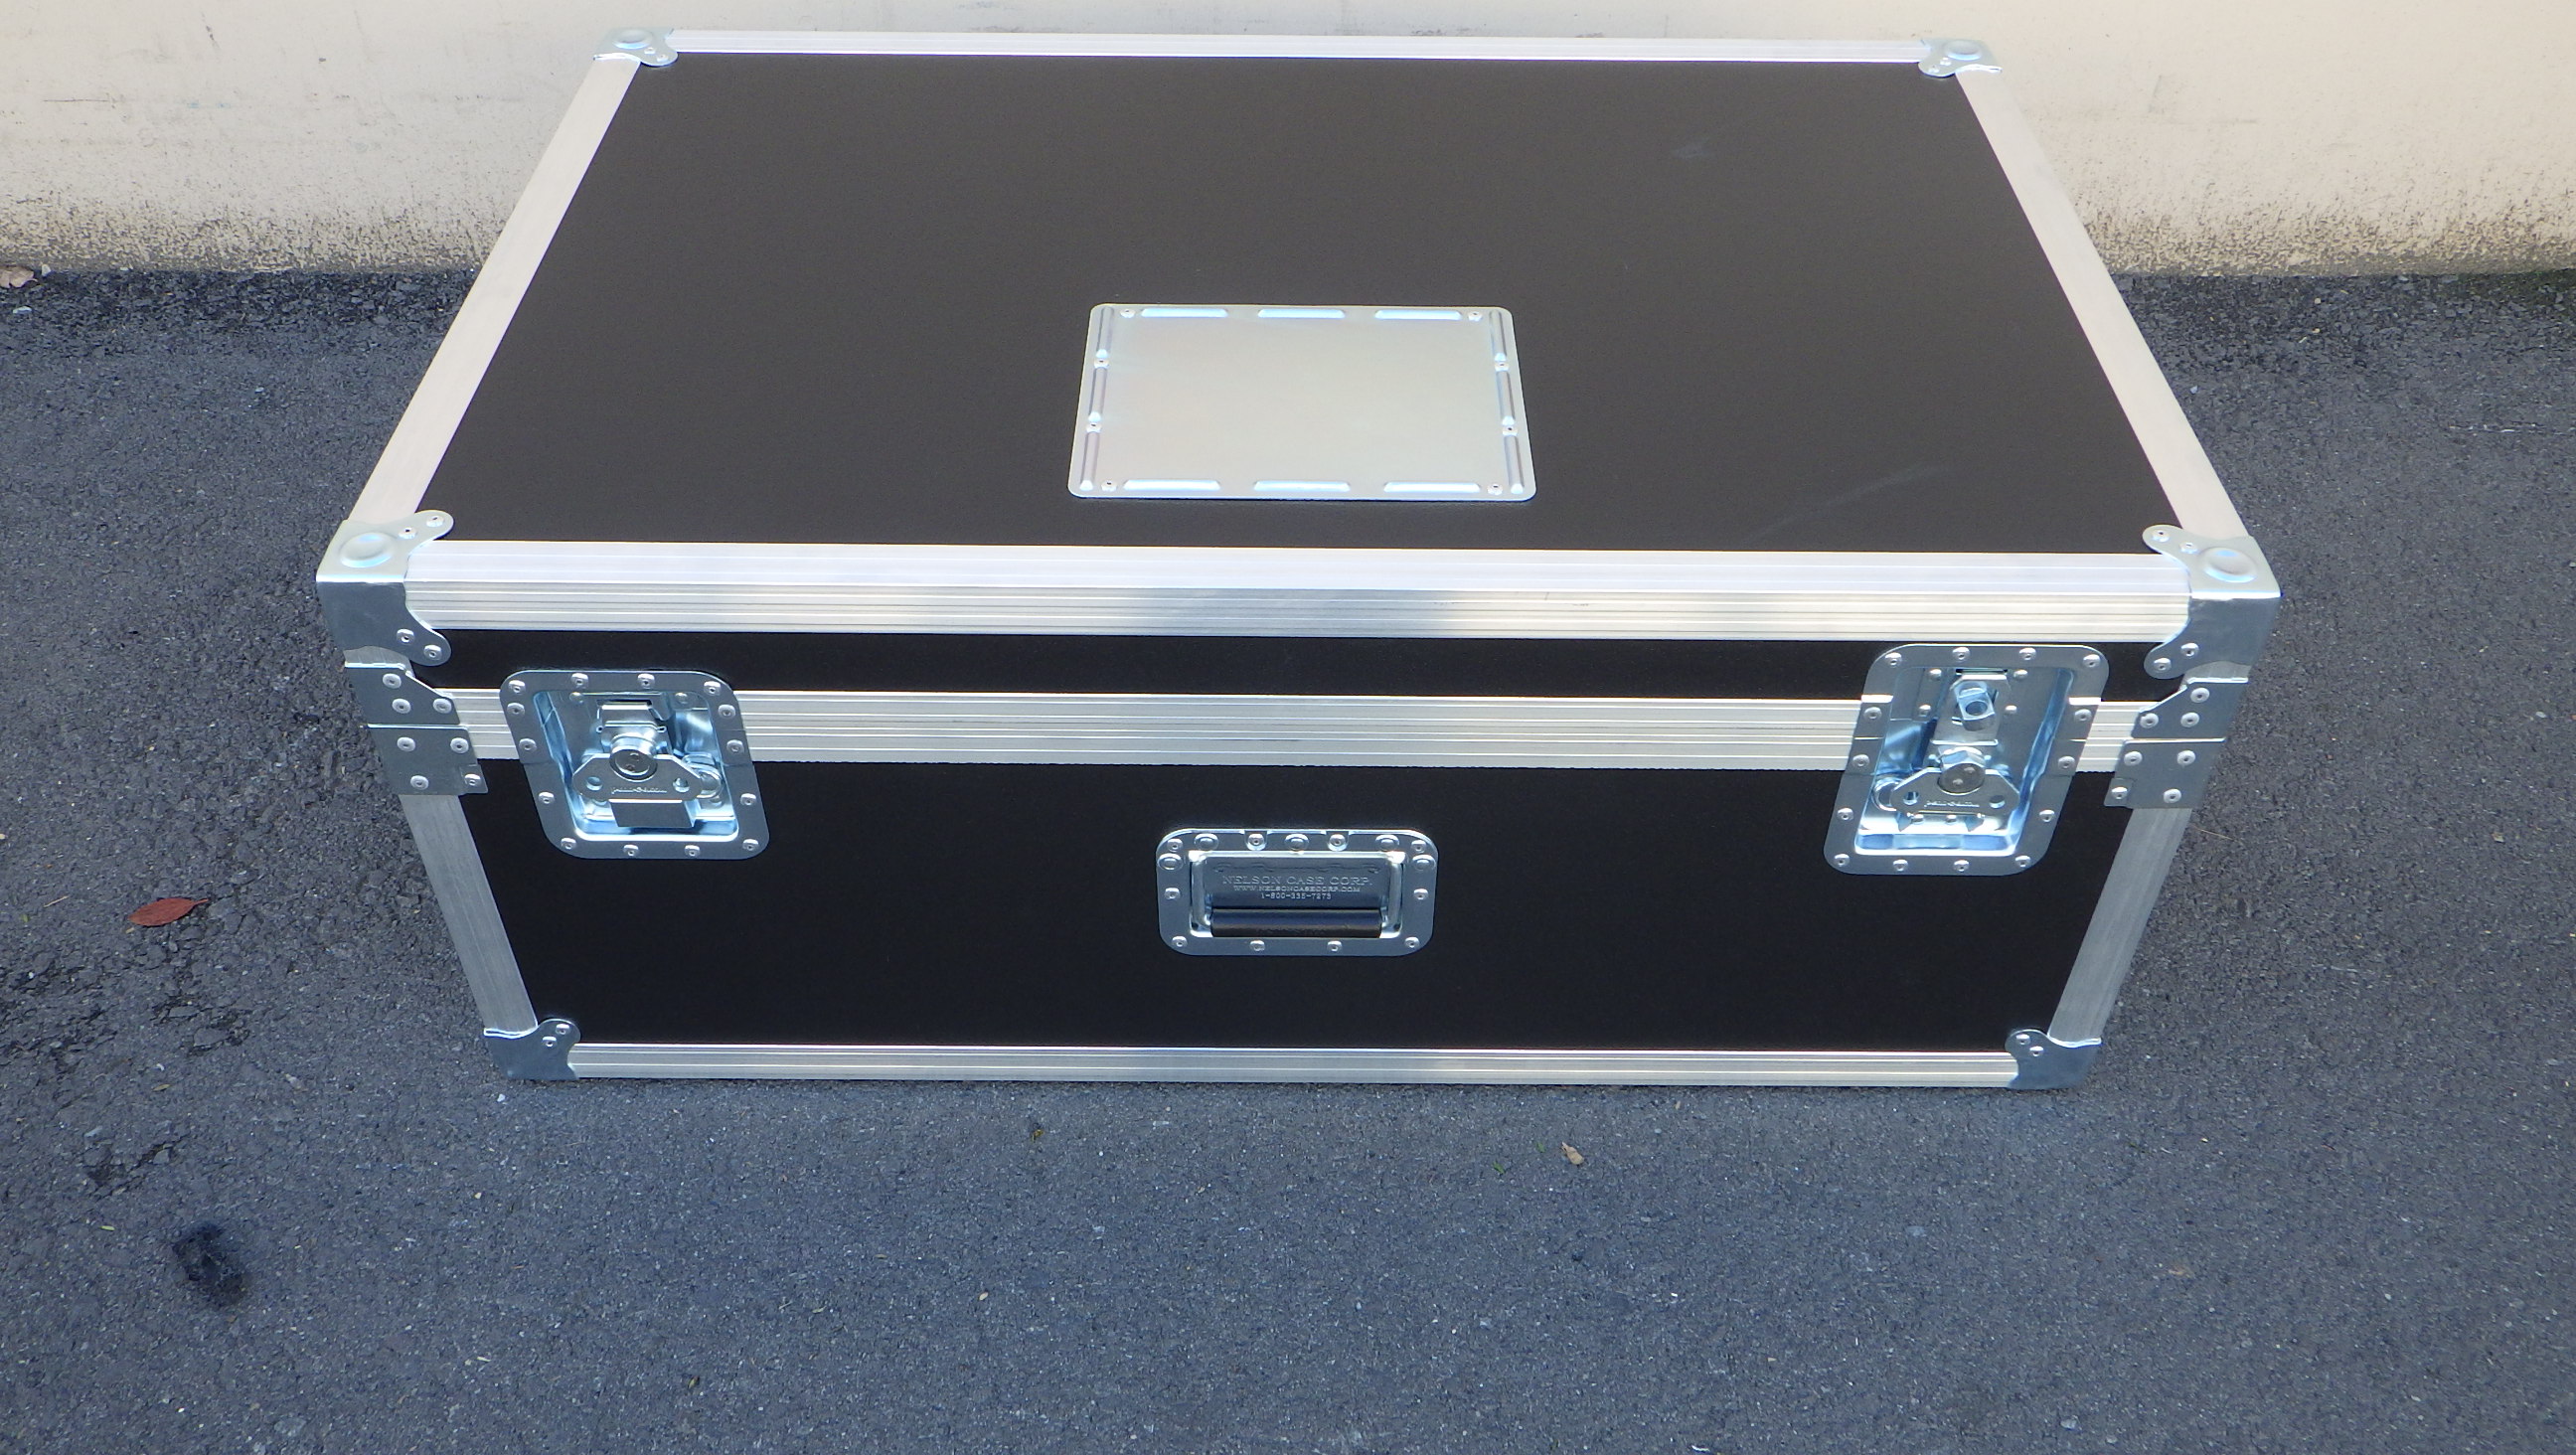 Print # 9561 - Custom Road Case, Exterior Shell 38 x 24 x 15, No Foam, No wheels   By Nelson Case Corp